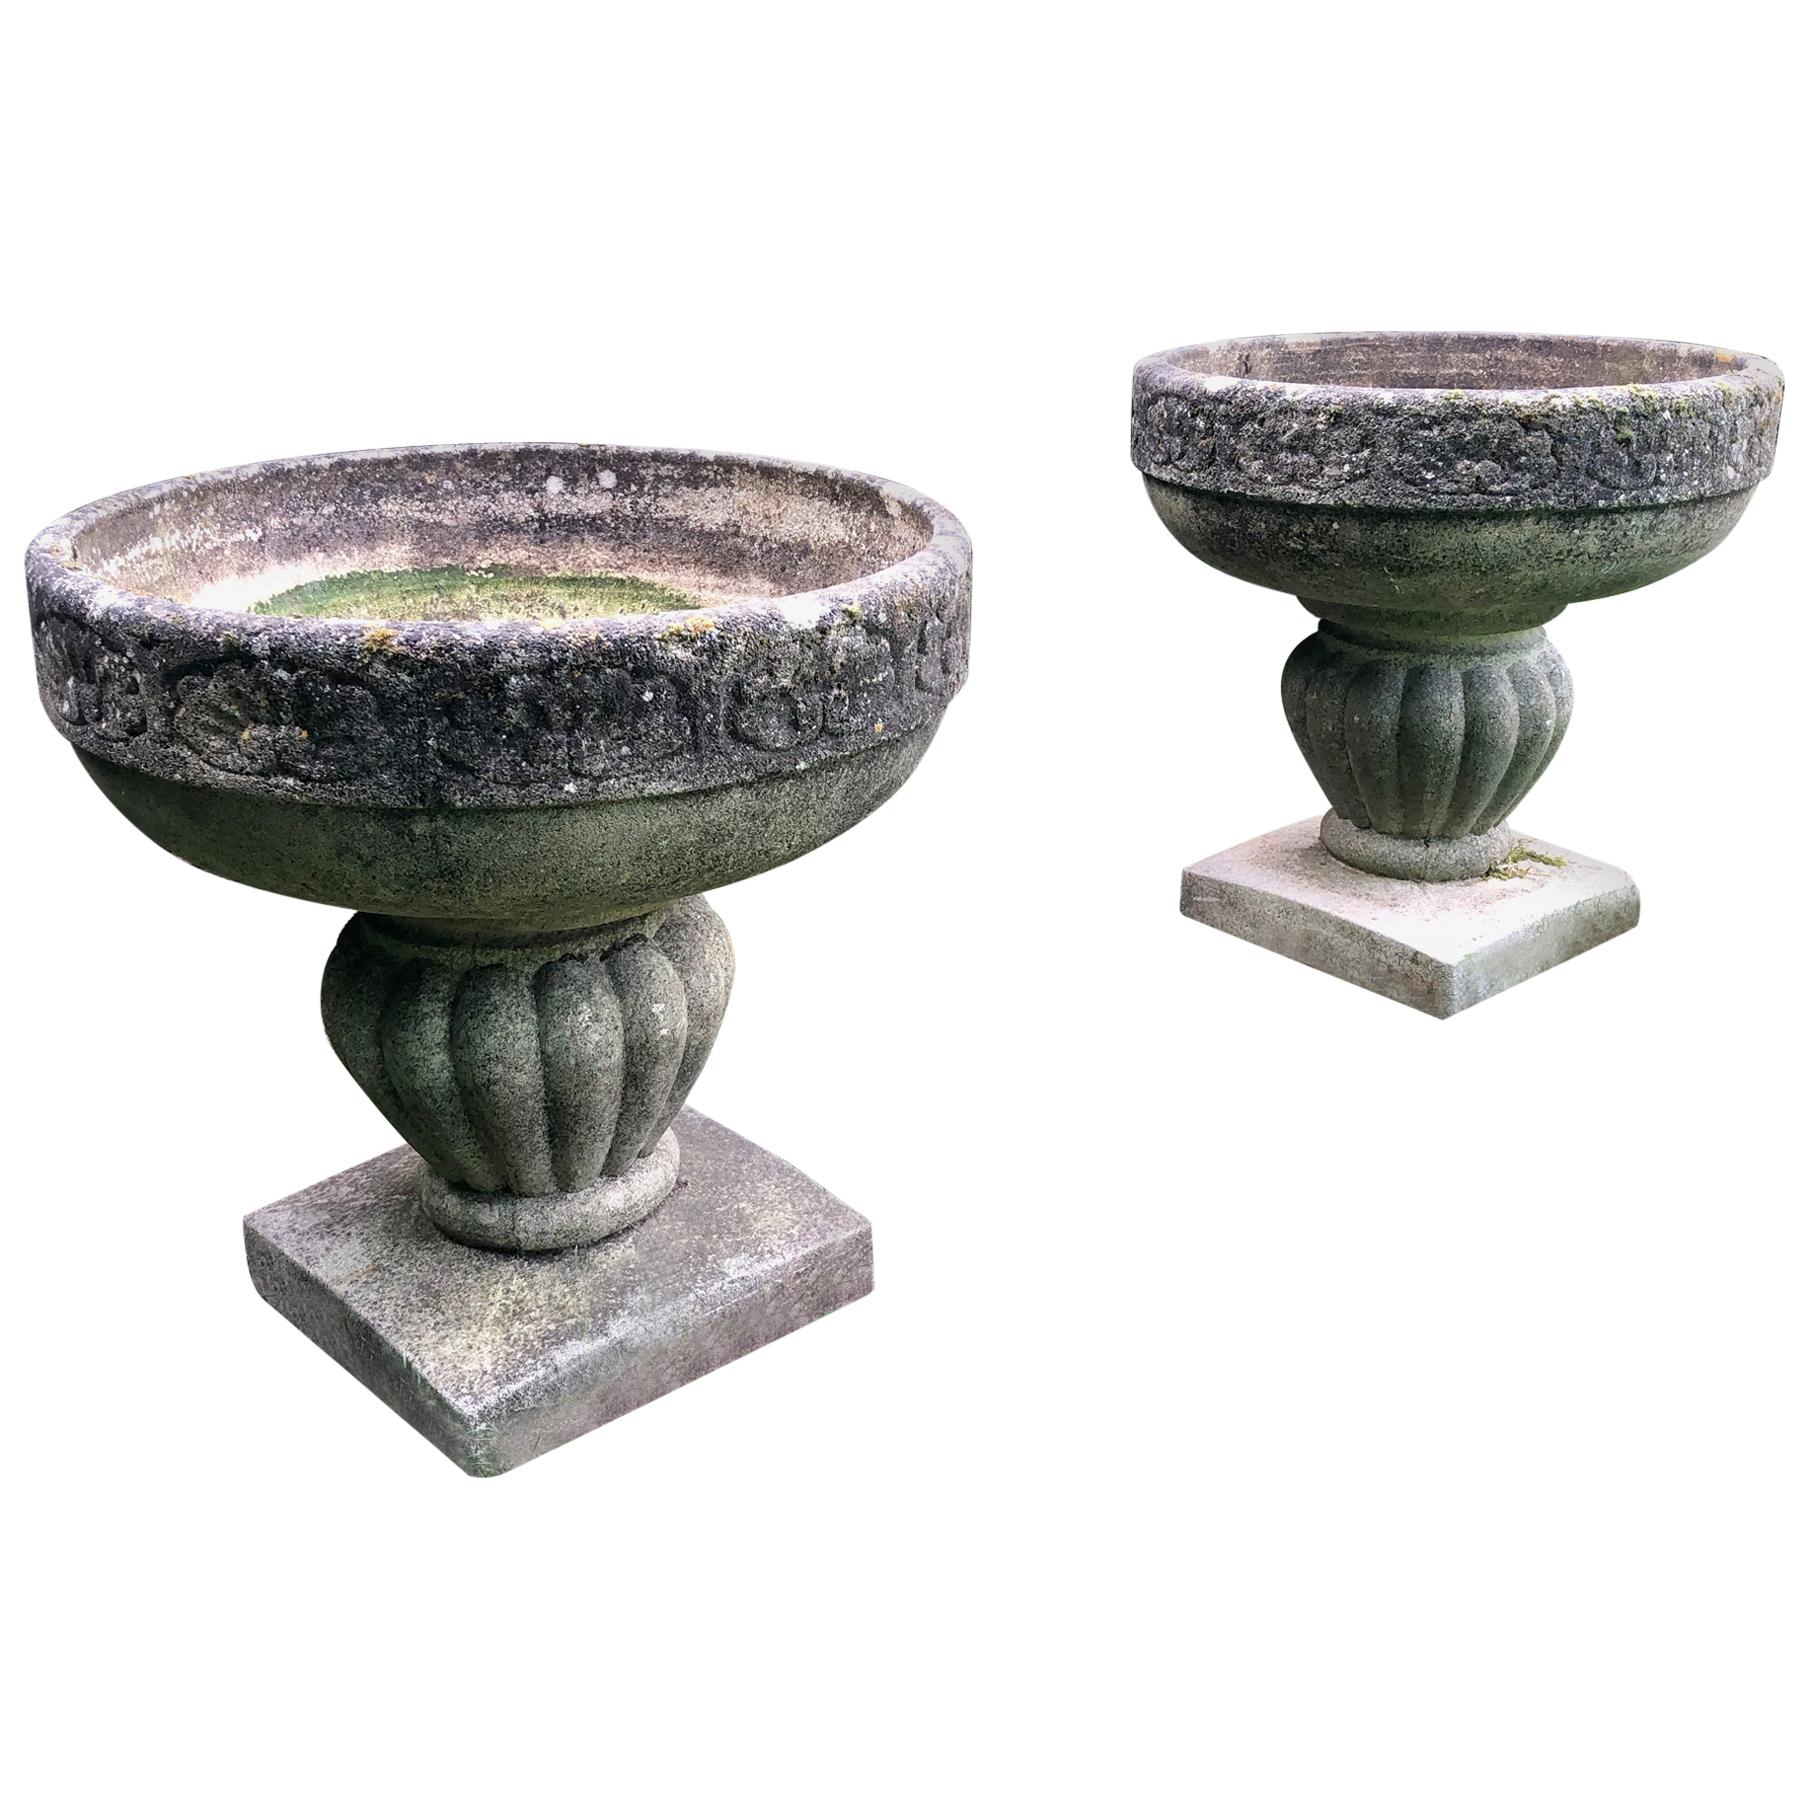 Pair of Round French Cast Stone Planters with Mossy Patina